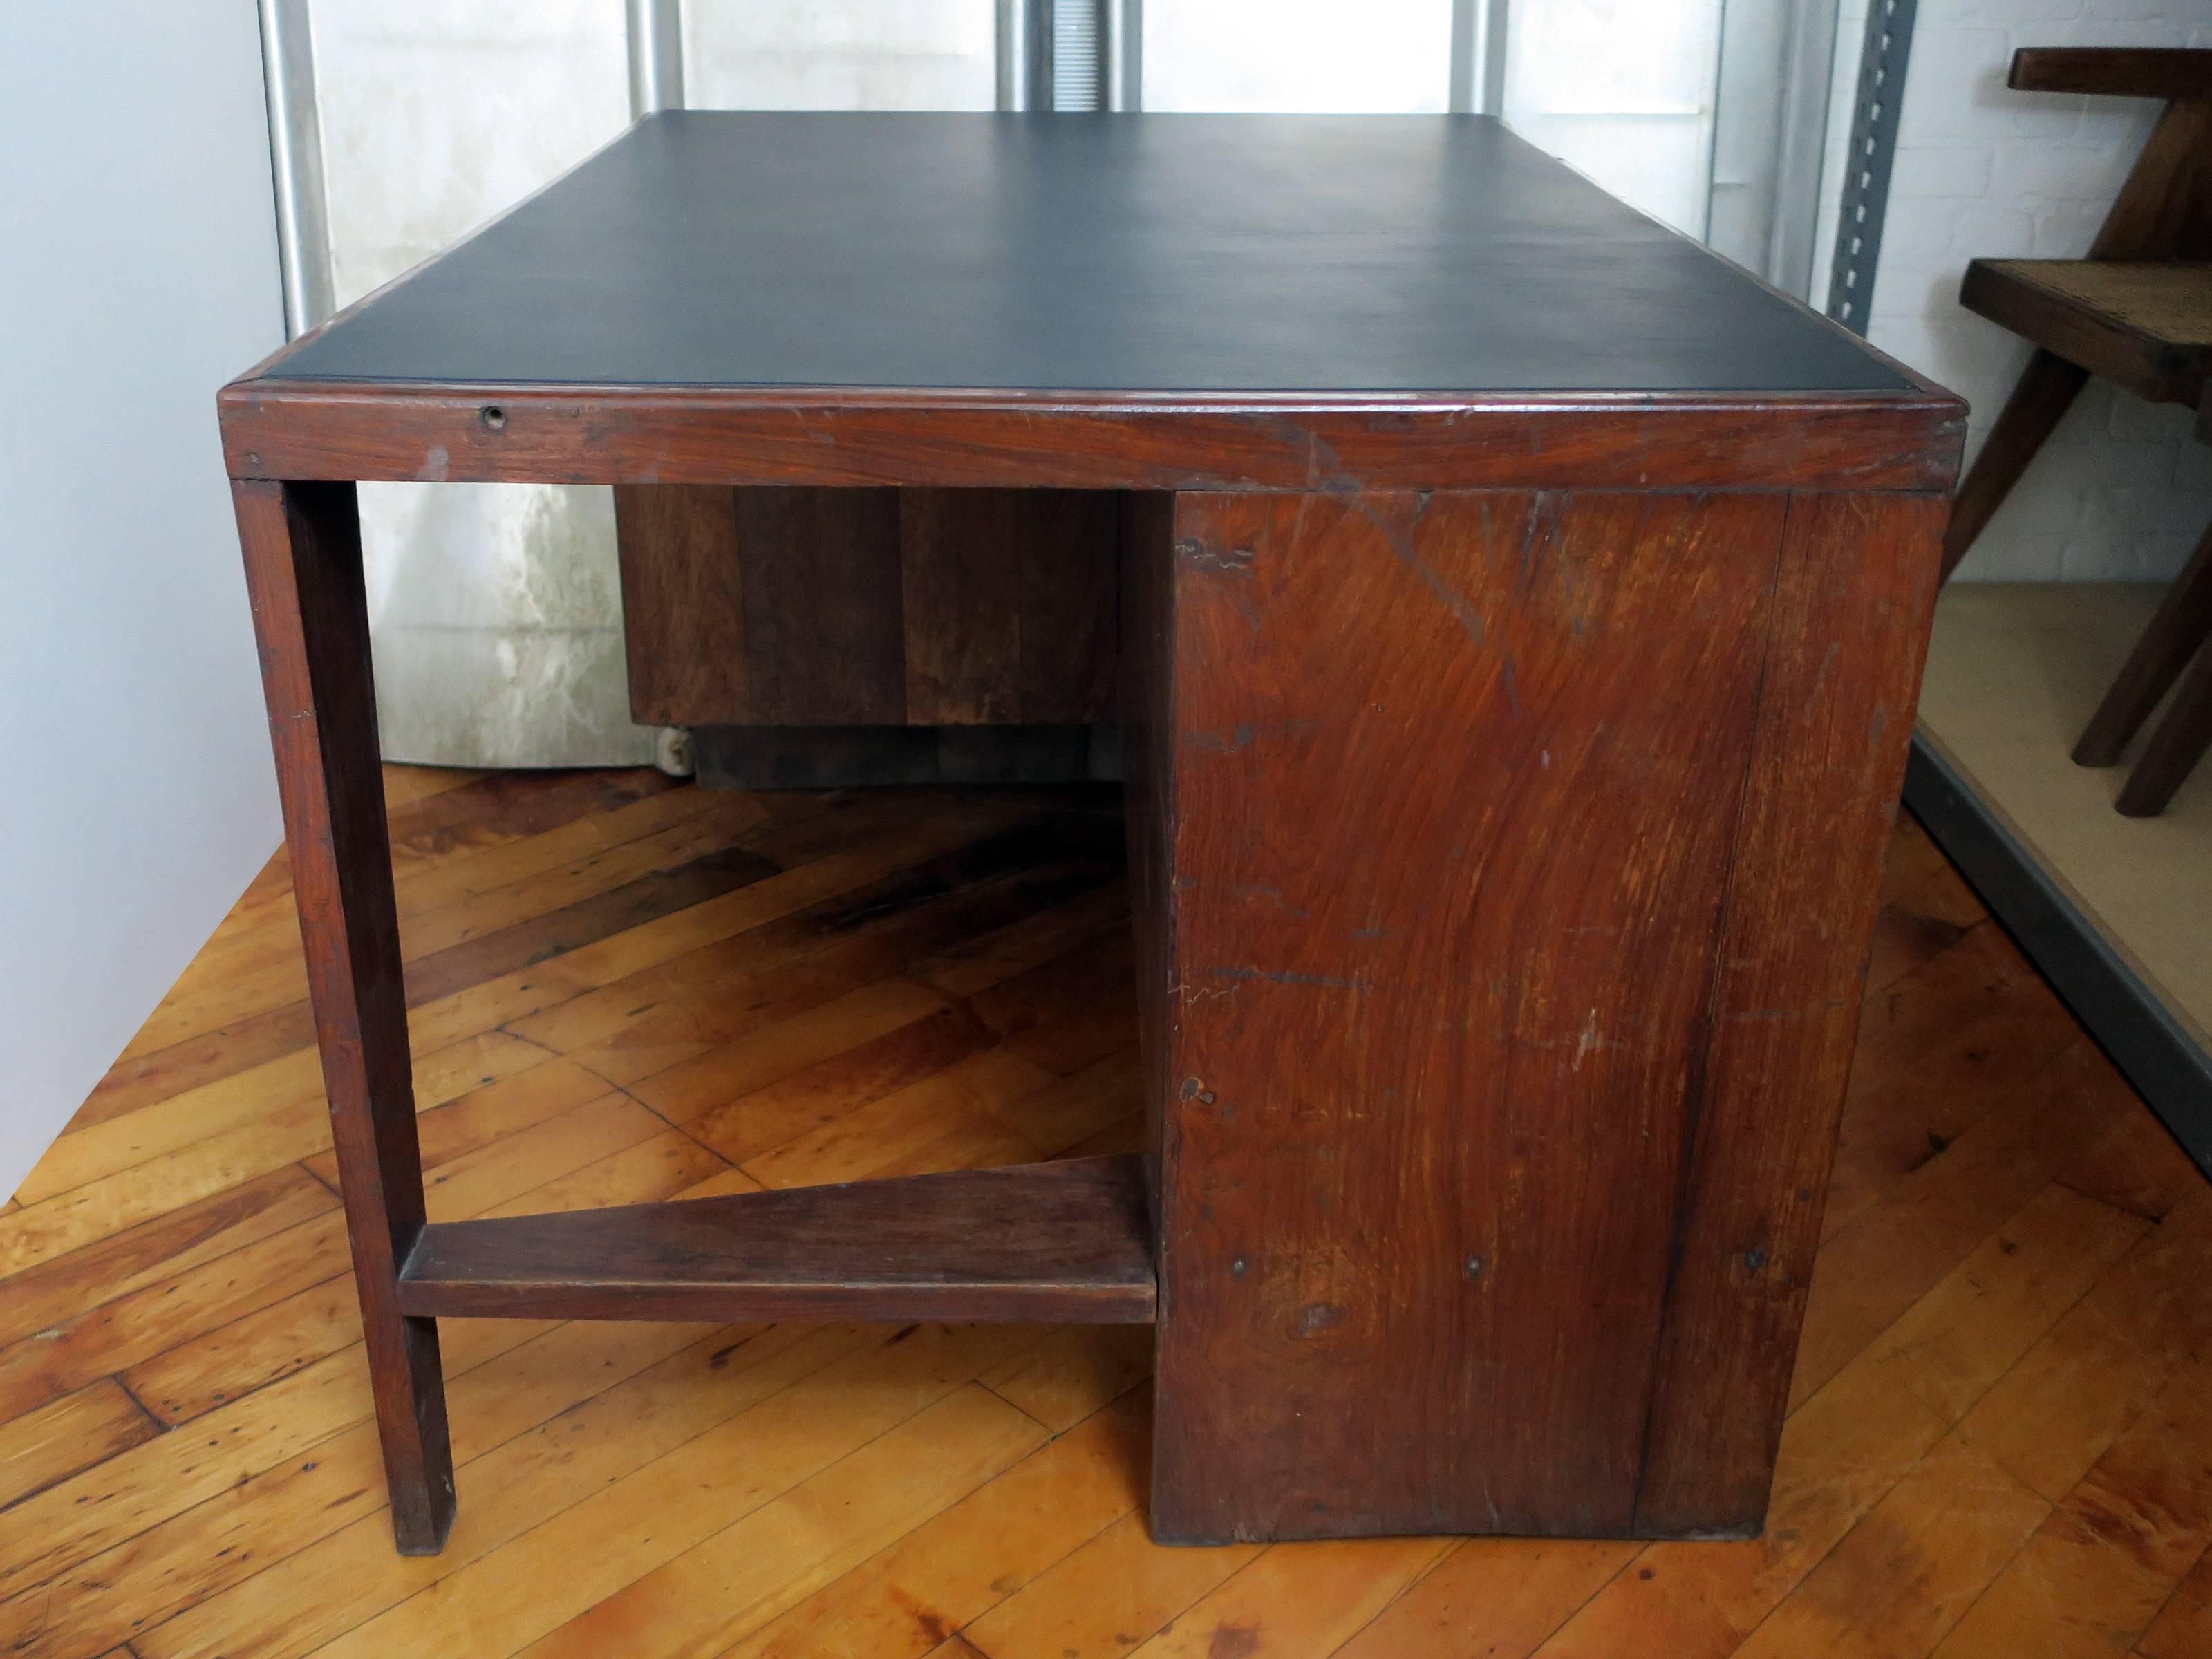 Indian Pierre Jeanneret Desk from the Administrative Buildings, Chandigarh